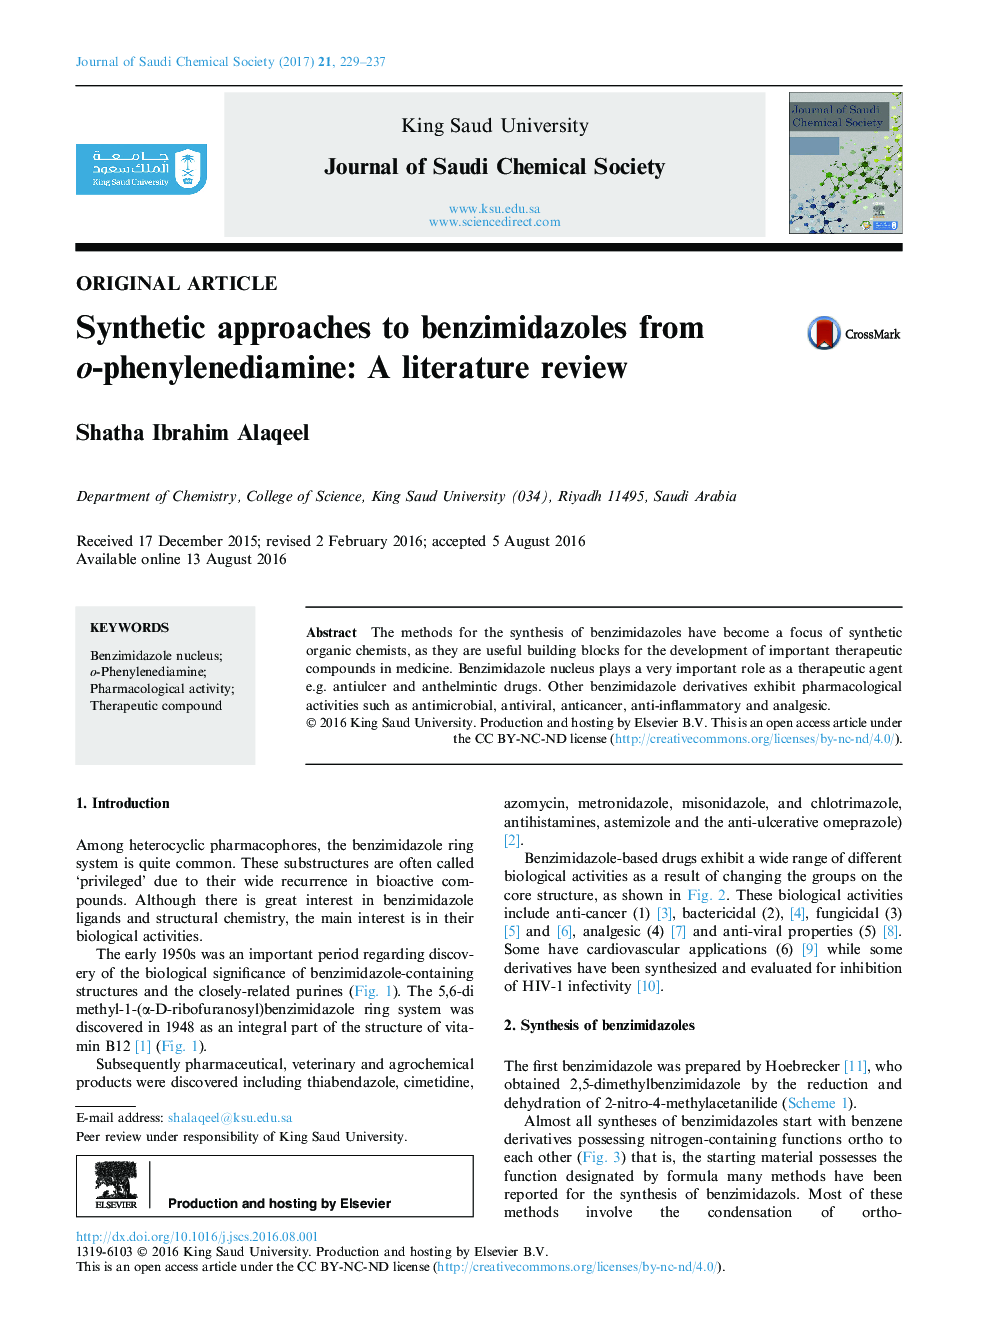 Synthetic approaches to benzimidazoles from o-phenylenediamine: A literature review